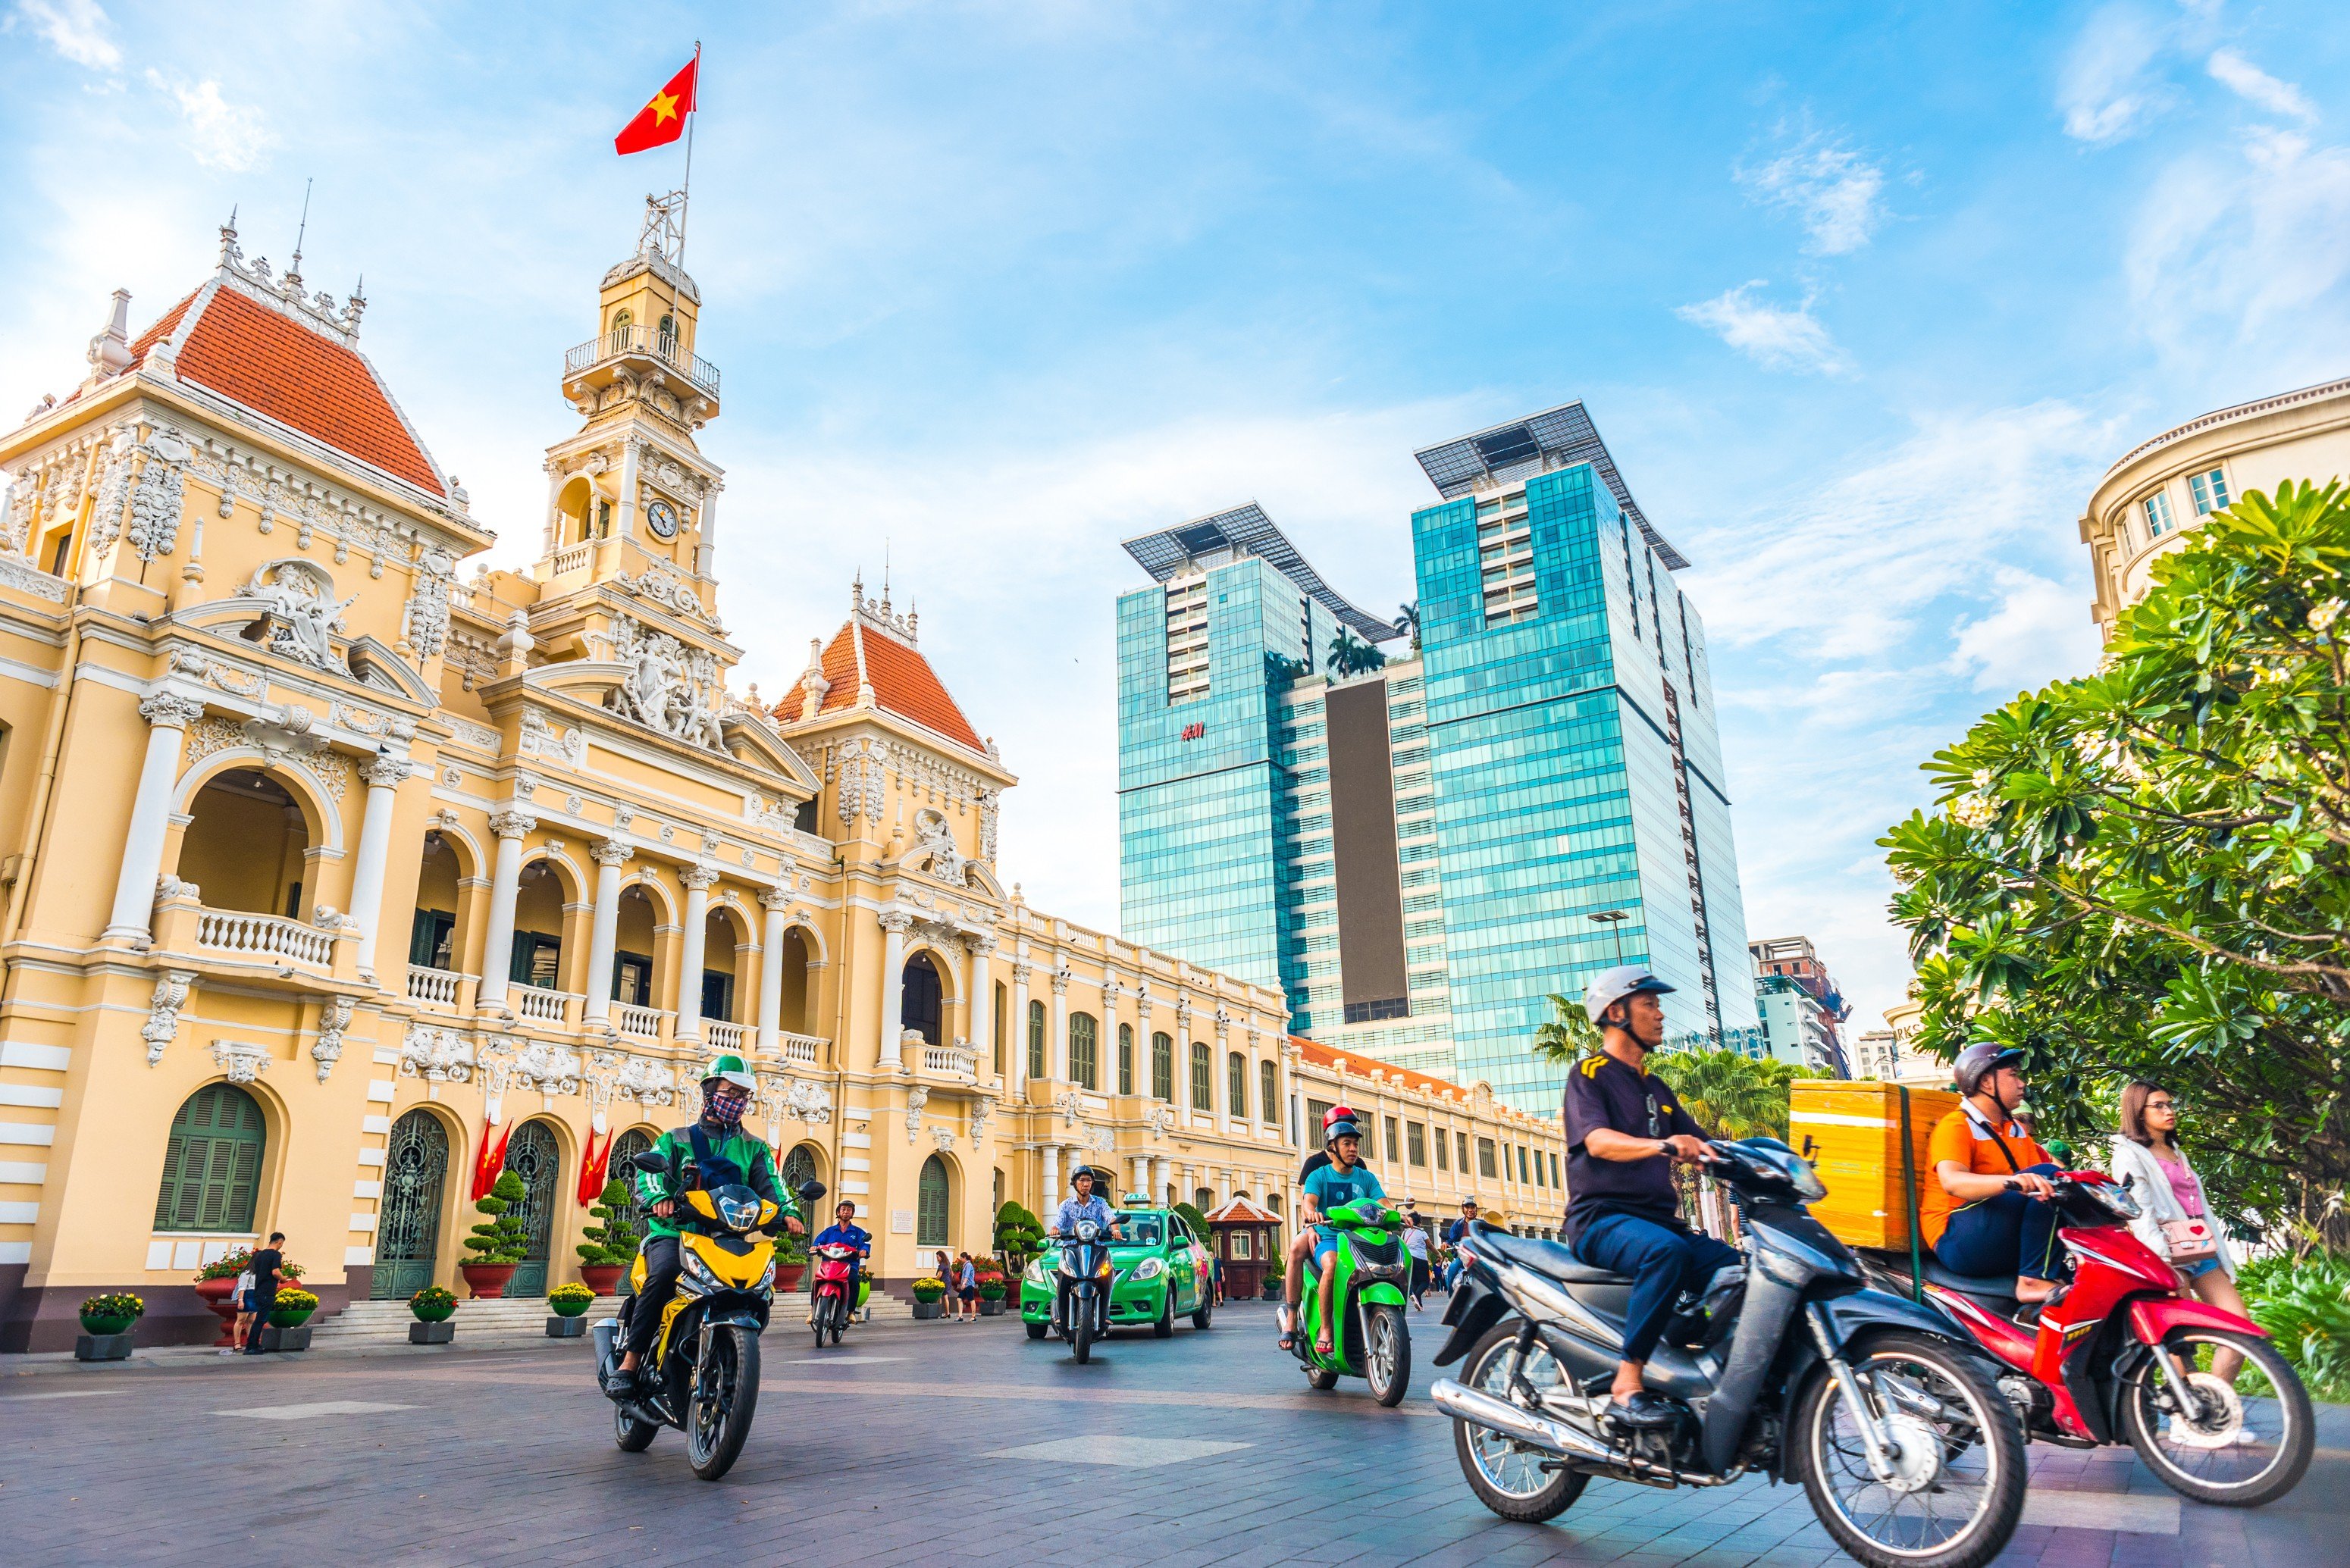 More retailers from abroad are racing to establish themselves in places like Ho Chi Minh City. Photo: Shutterstock